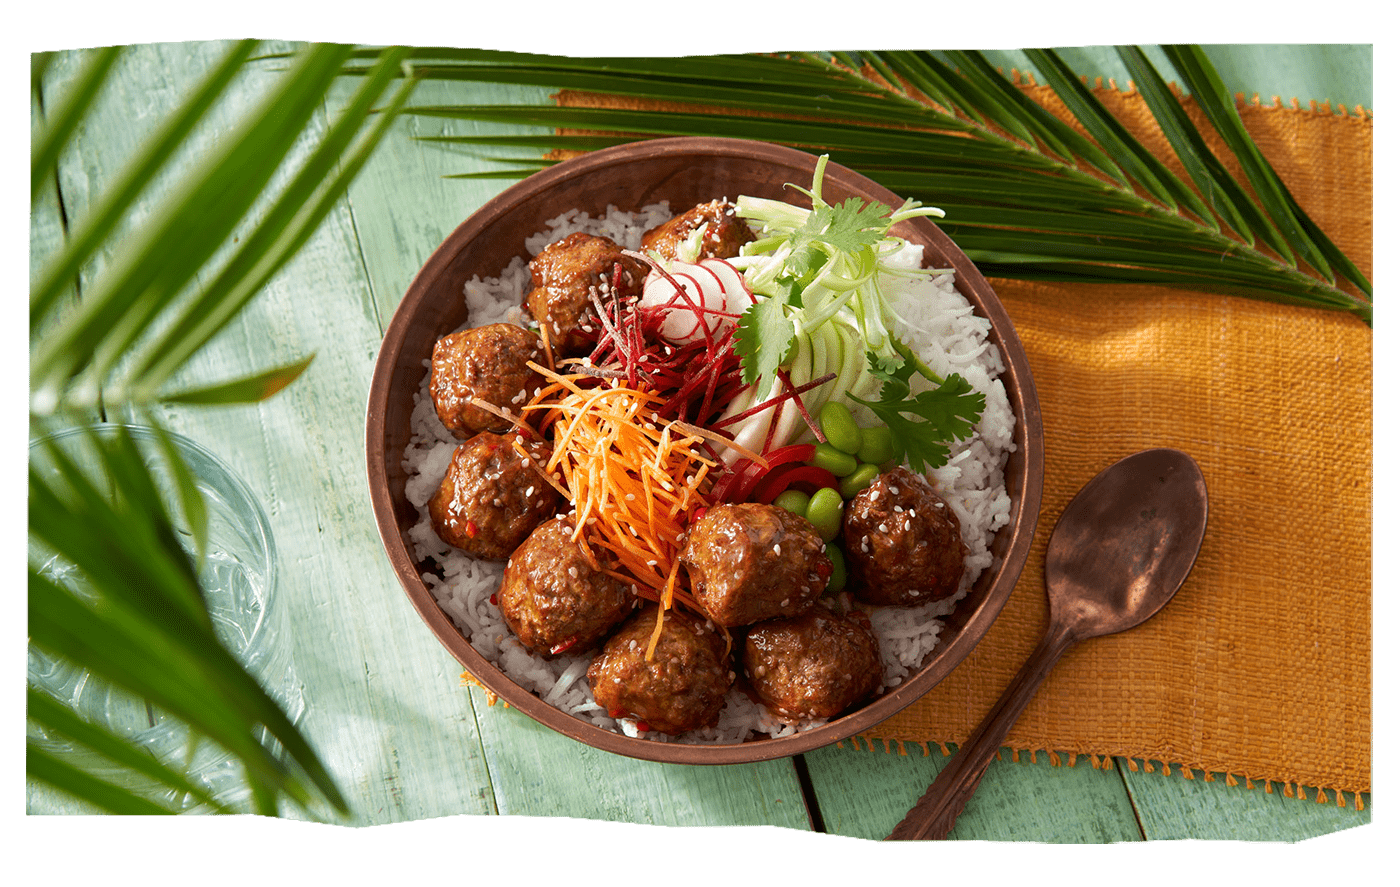 Vegetarian Delight: How to Make Flavorful Jackfruit Meatballs at Home